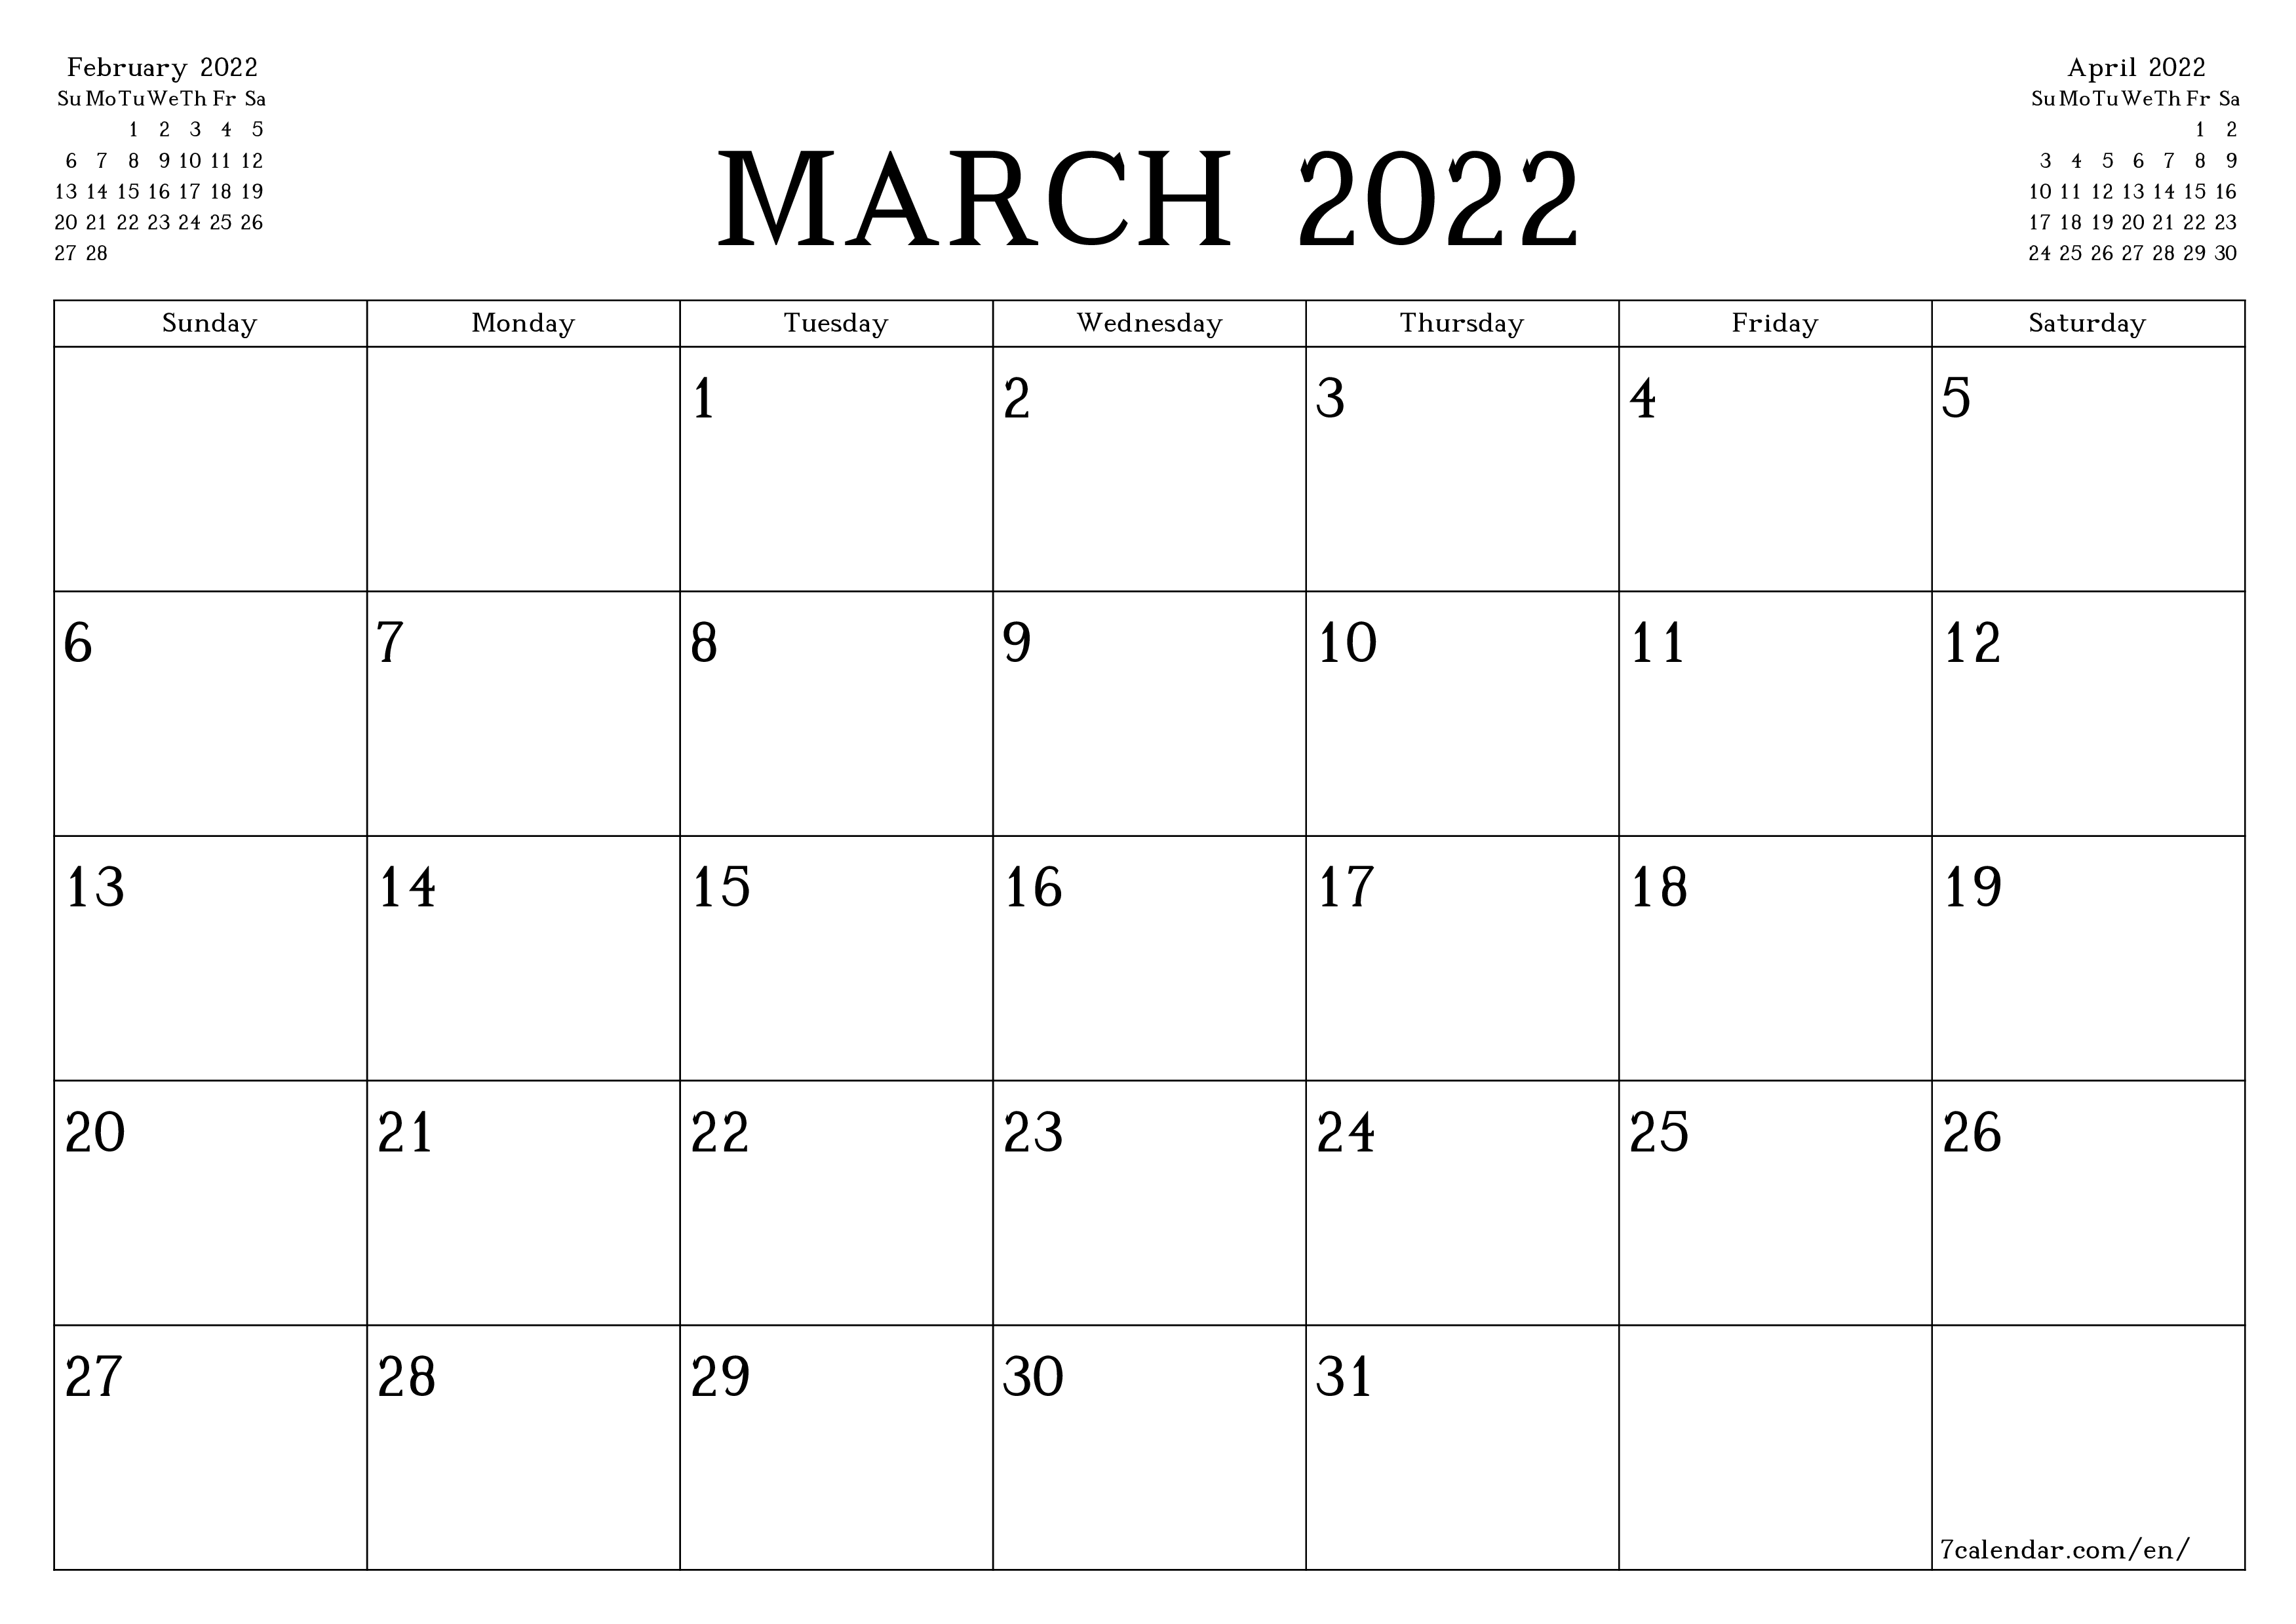 March 2022 Printable Calendar March 2022 Free Printable Calendars And Planners, Pdf Templates - 7Calendar